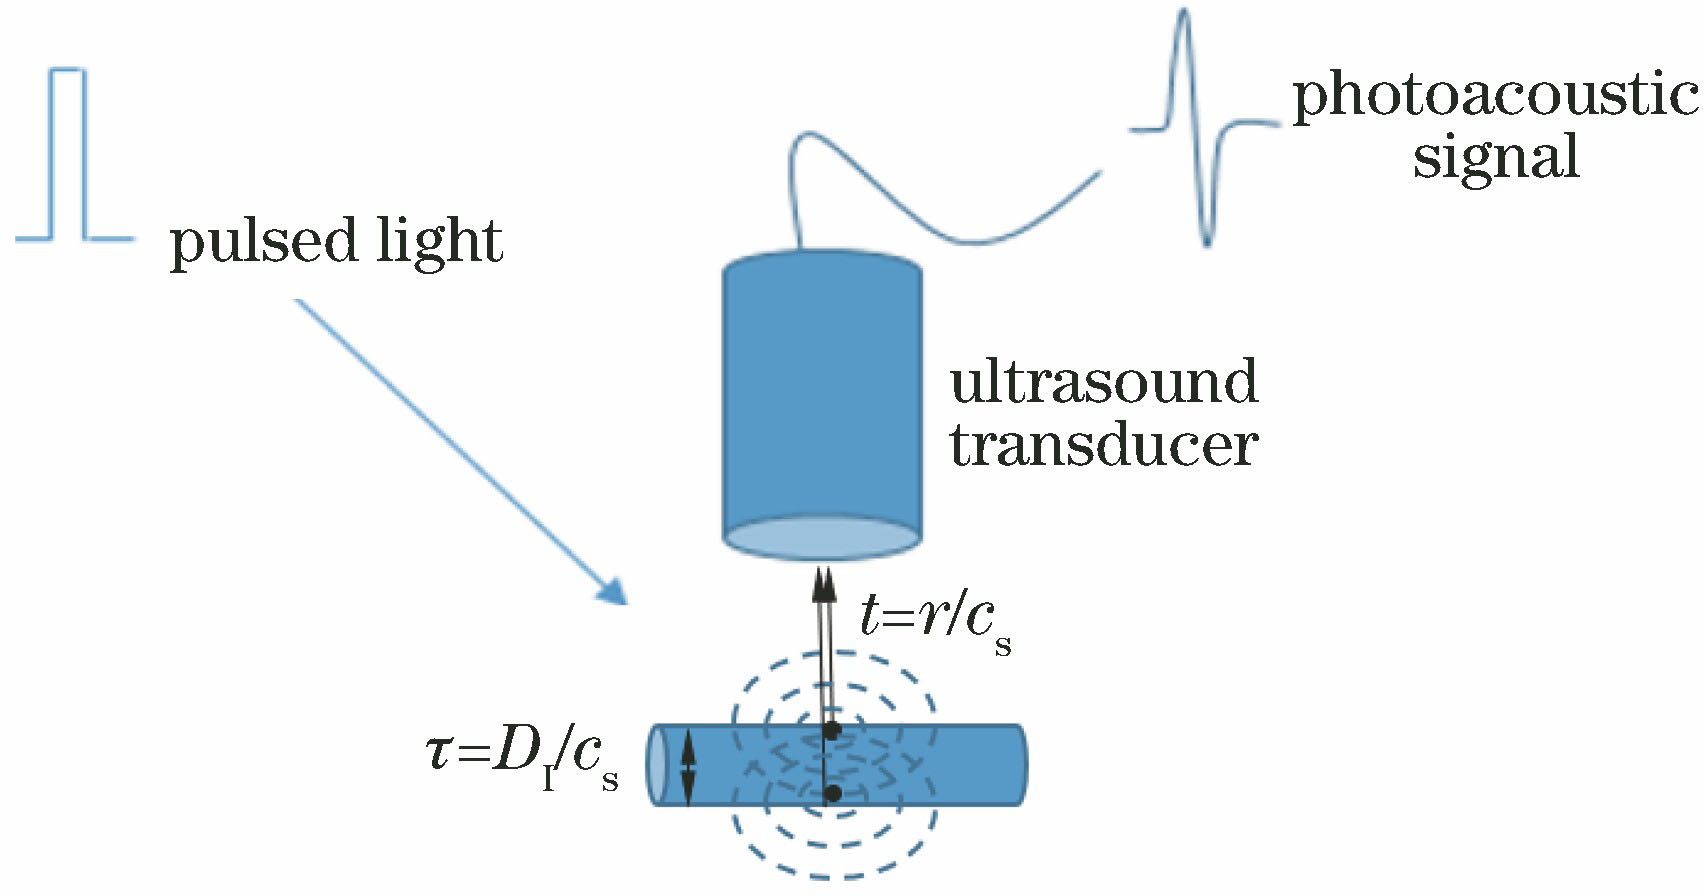 Diagram of photoacoustic signal excitation and detection